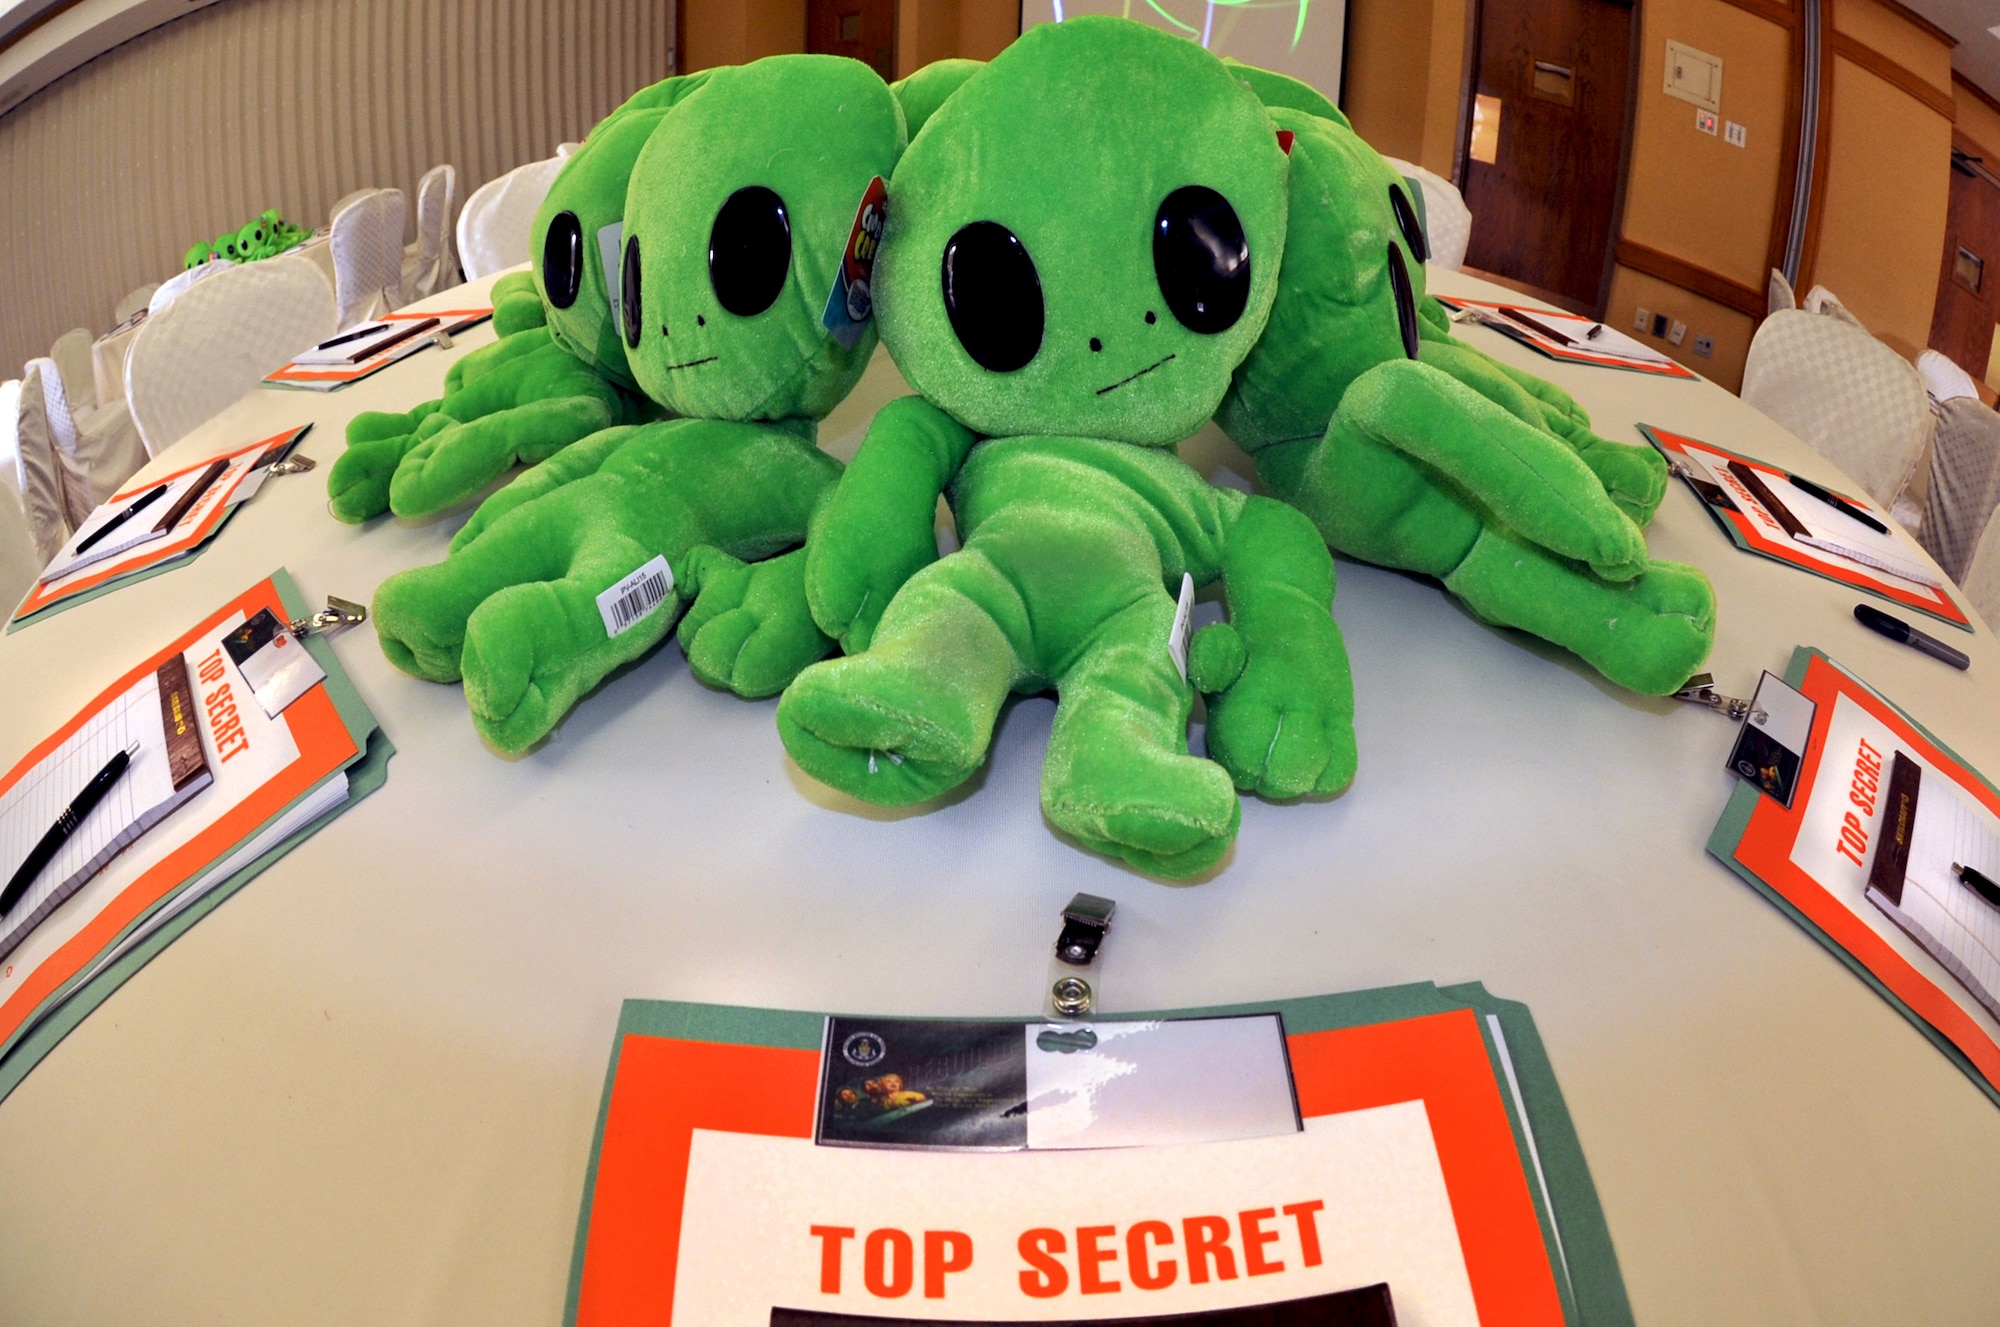 Alien plush dolls sit on each table along with top secret files during the REBOUND Resiliency Seminar at Yongsan Army Garrison, Republic of Korea, June 8, 2013. The files were filled with worksheets breaking down the acronym REBOUND, which stands for: reframing; empathy and encouragement; build support relationships; open and clear communication; undo negative scripts and navigate reality into successes and failures; and develop holistic health. (U.S. Air Force photo/Senior Airman Kristina Overton)